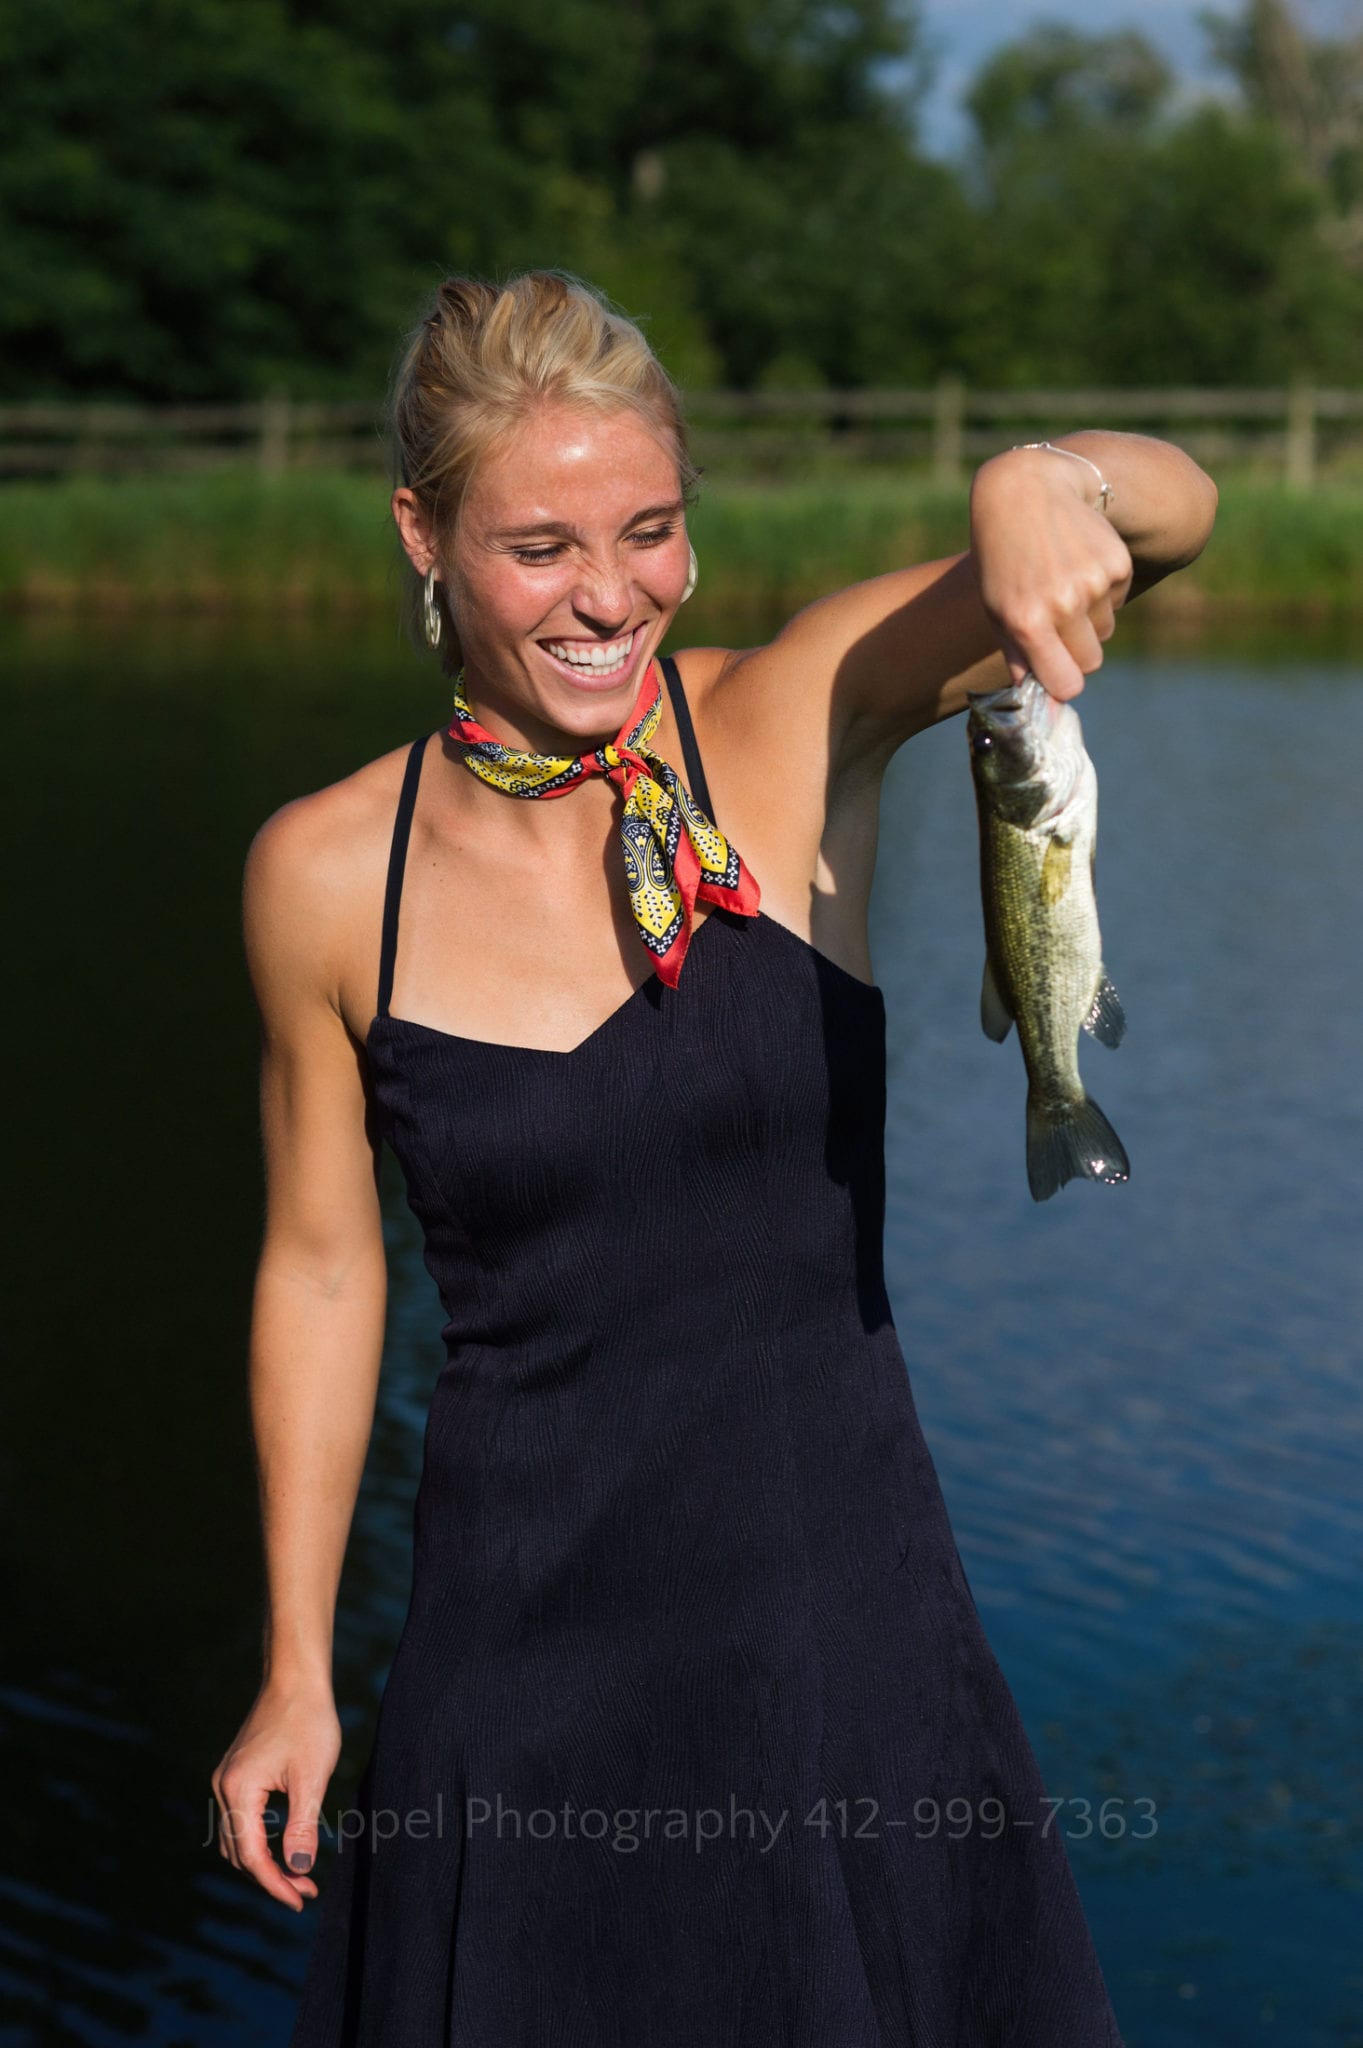 A smiling blond woman wearing a dark blue dress holds a fish that she caught from the pond behind her. Armstrong Farms Weddings